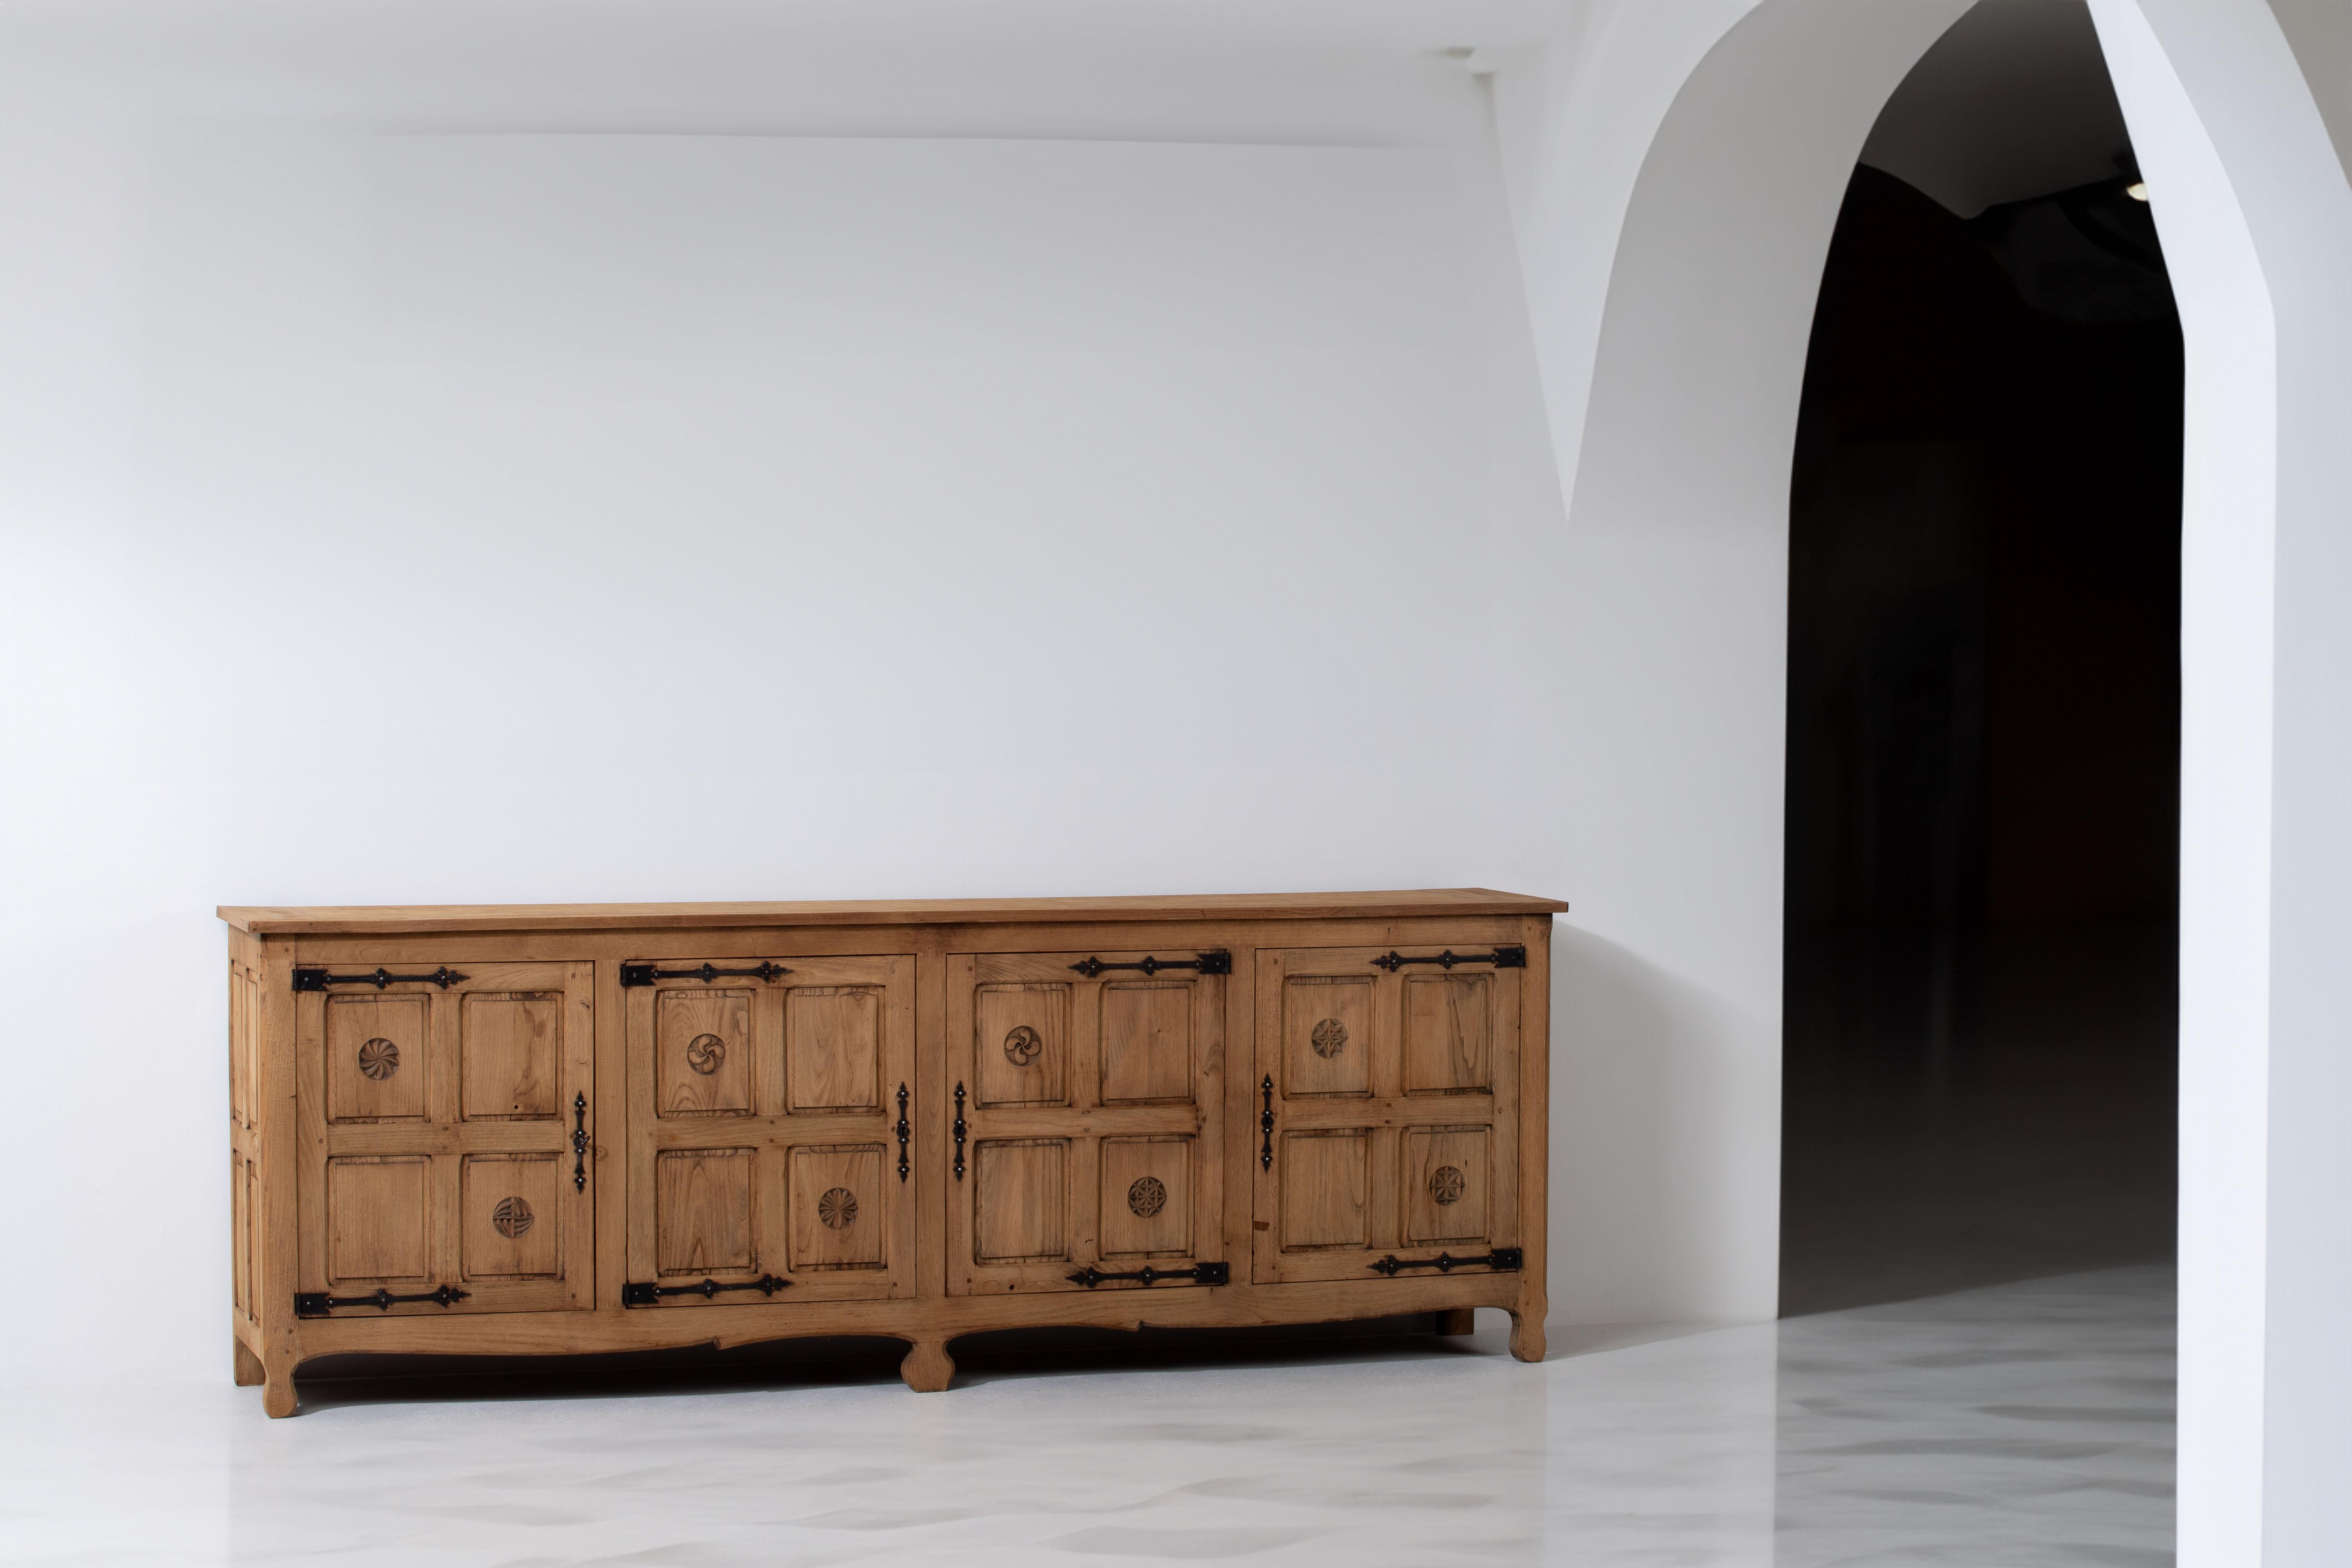 This magnificent oak sideboard originates from France and dates back to the elegant era of the 1950s. Its exquisite craftsmanship is unveiled through intricate carved panels on both sides and doors, truly showcasing the skill and artistry of French